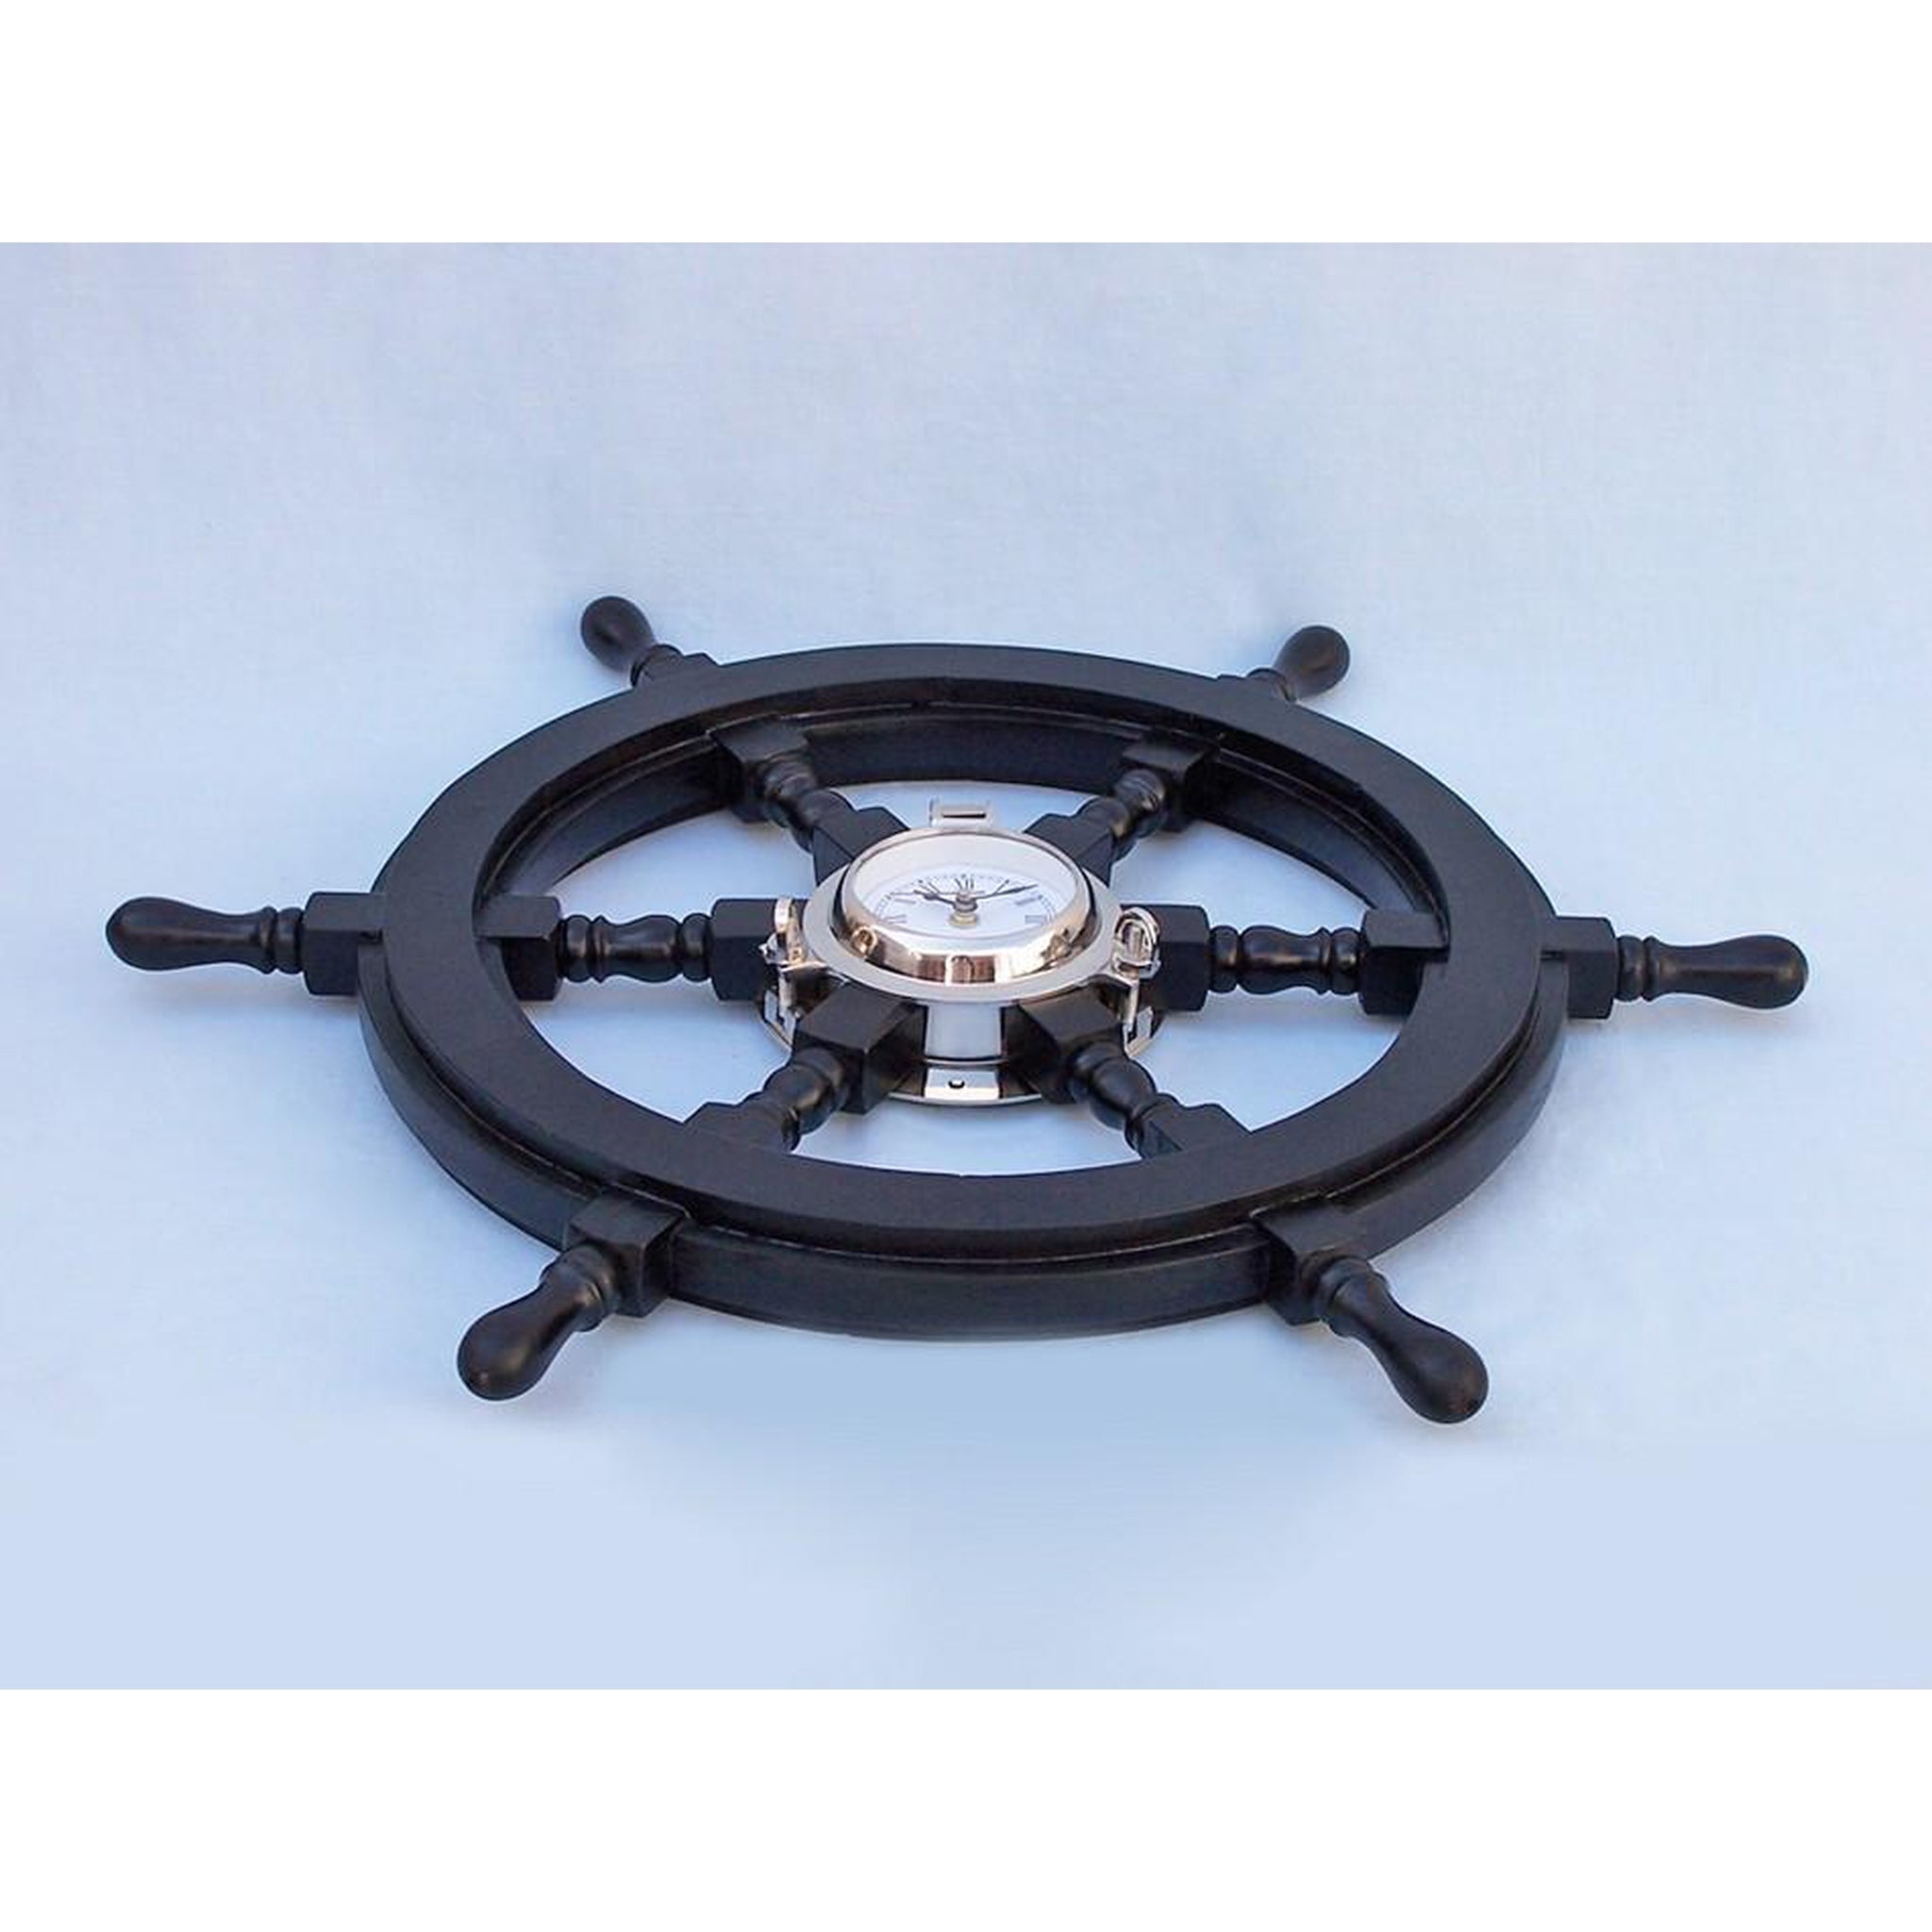 Buy Deluxe Class Wood and Chrome Pirate Ship Wheel Clock 24